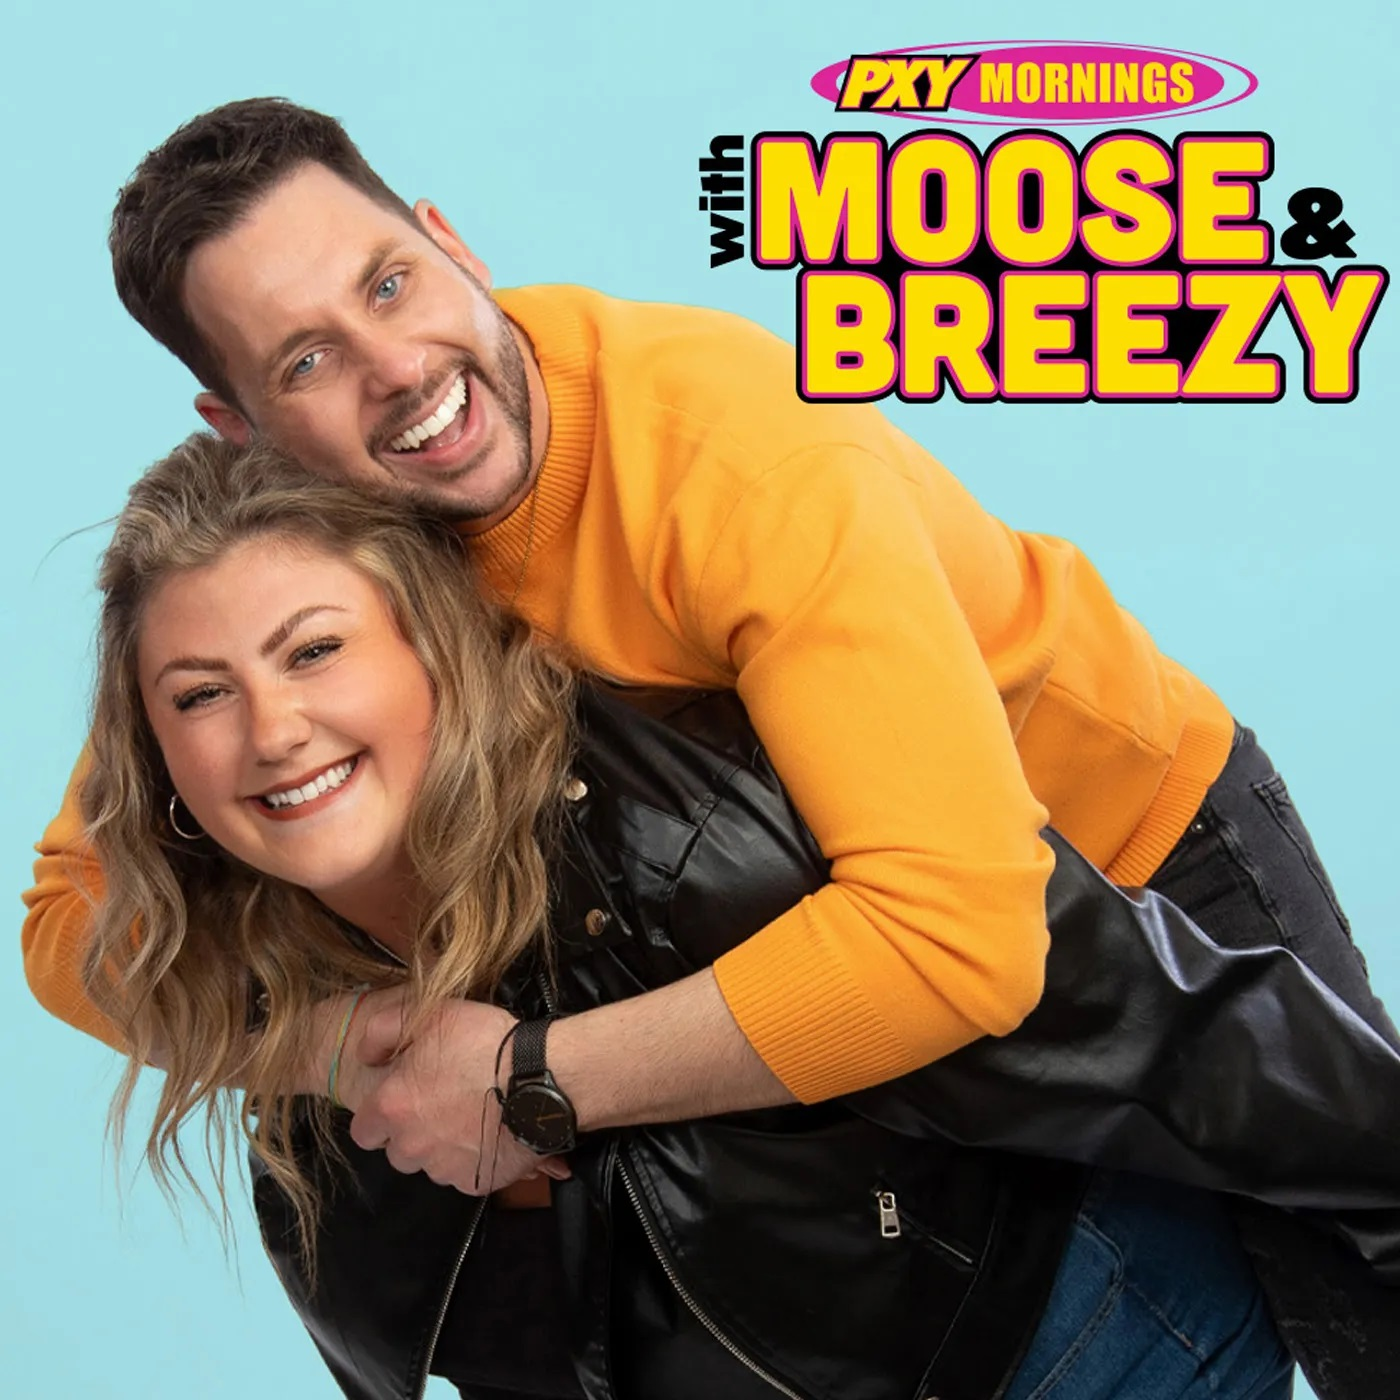 Is Moose the Creepy Uncle?